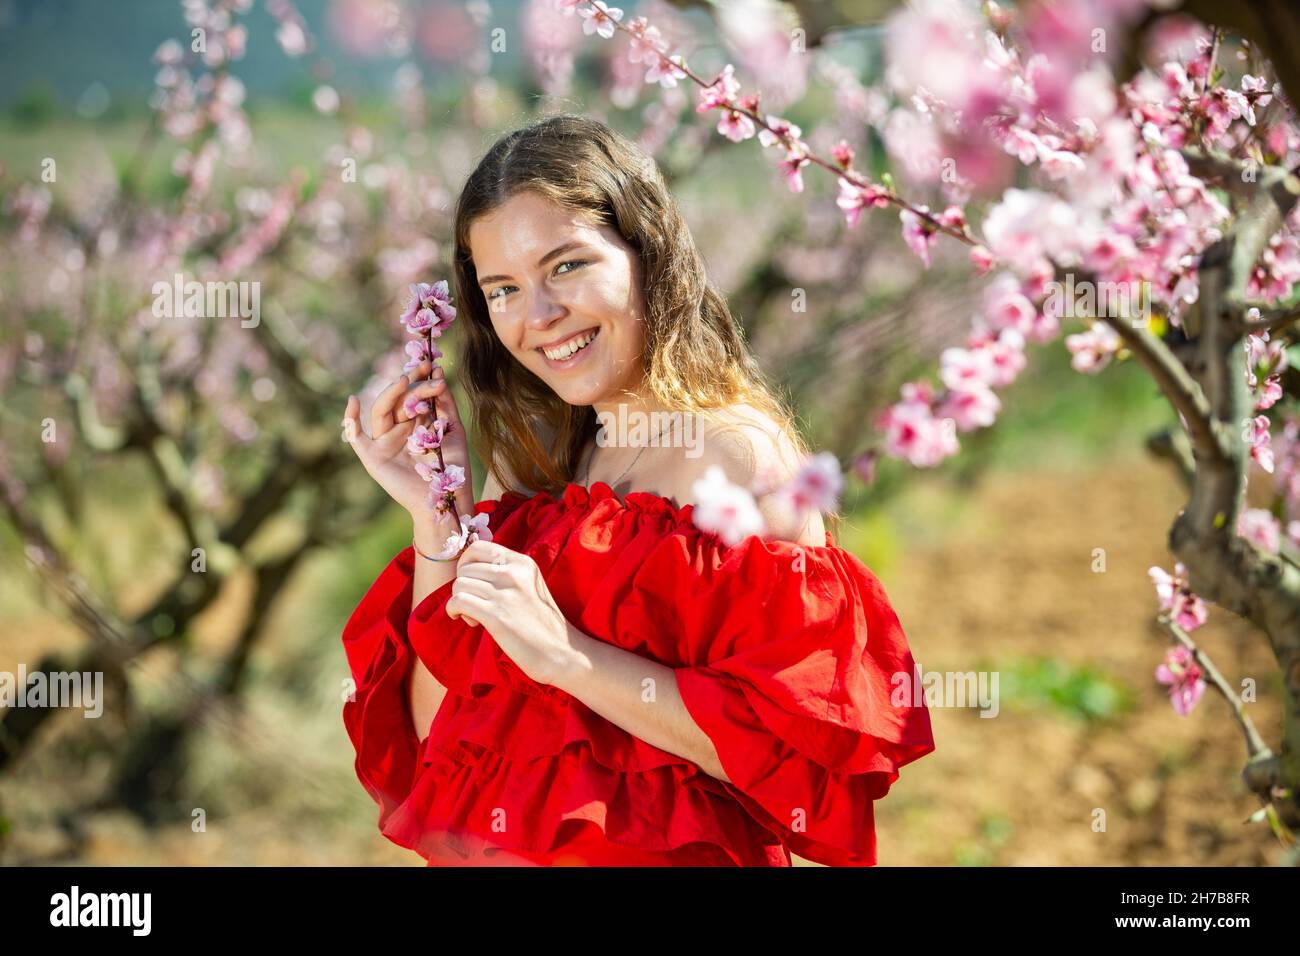 Woman in red dress standing near blooming peach tree Stock Photo